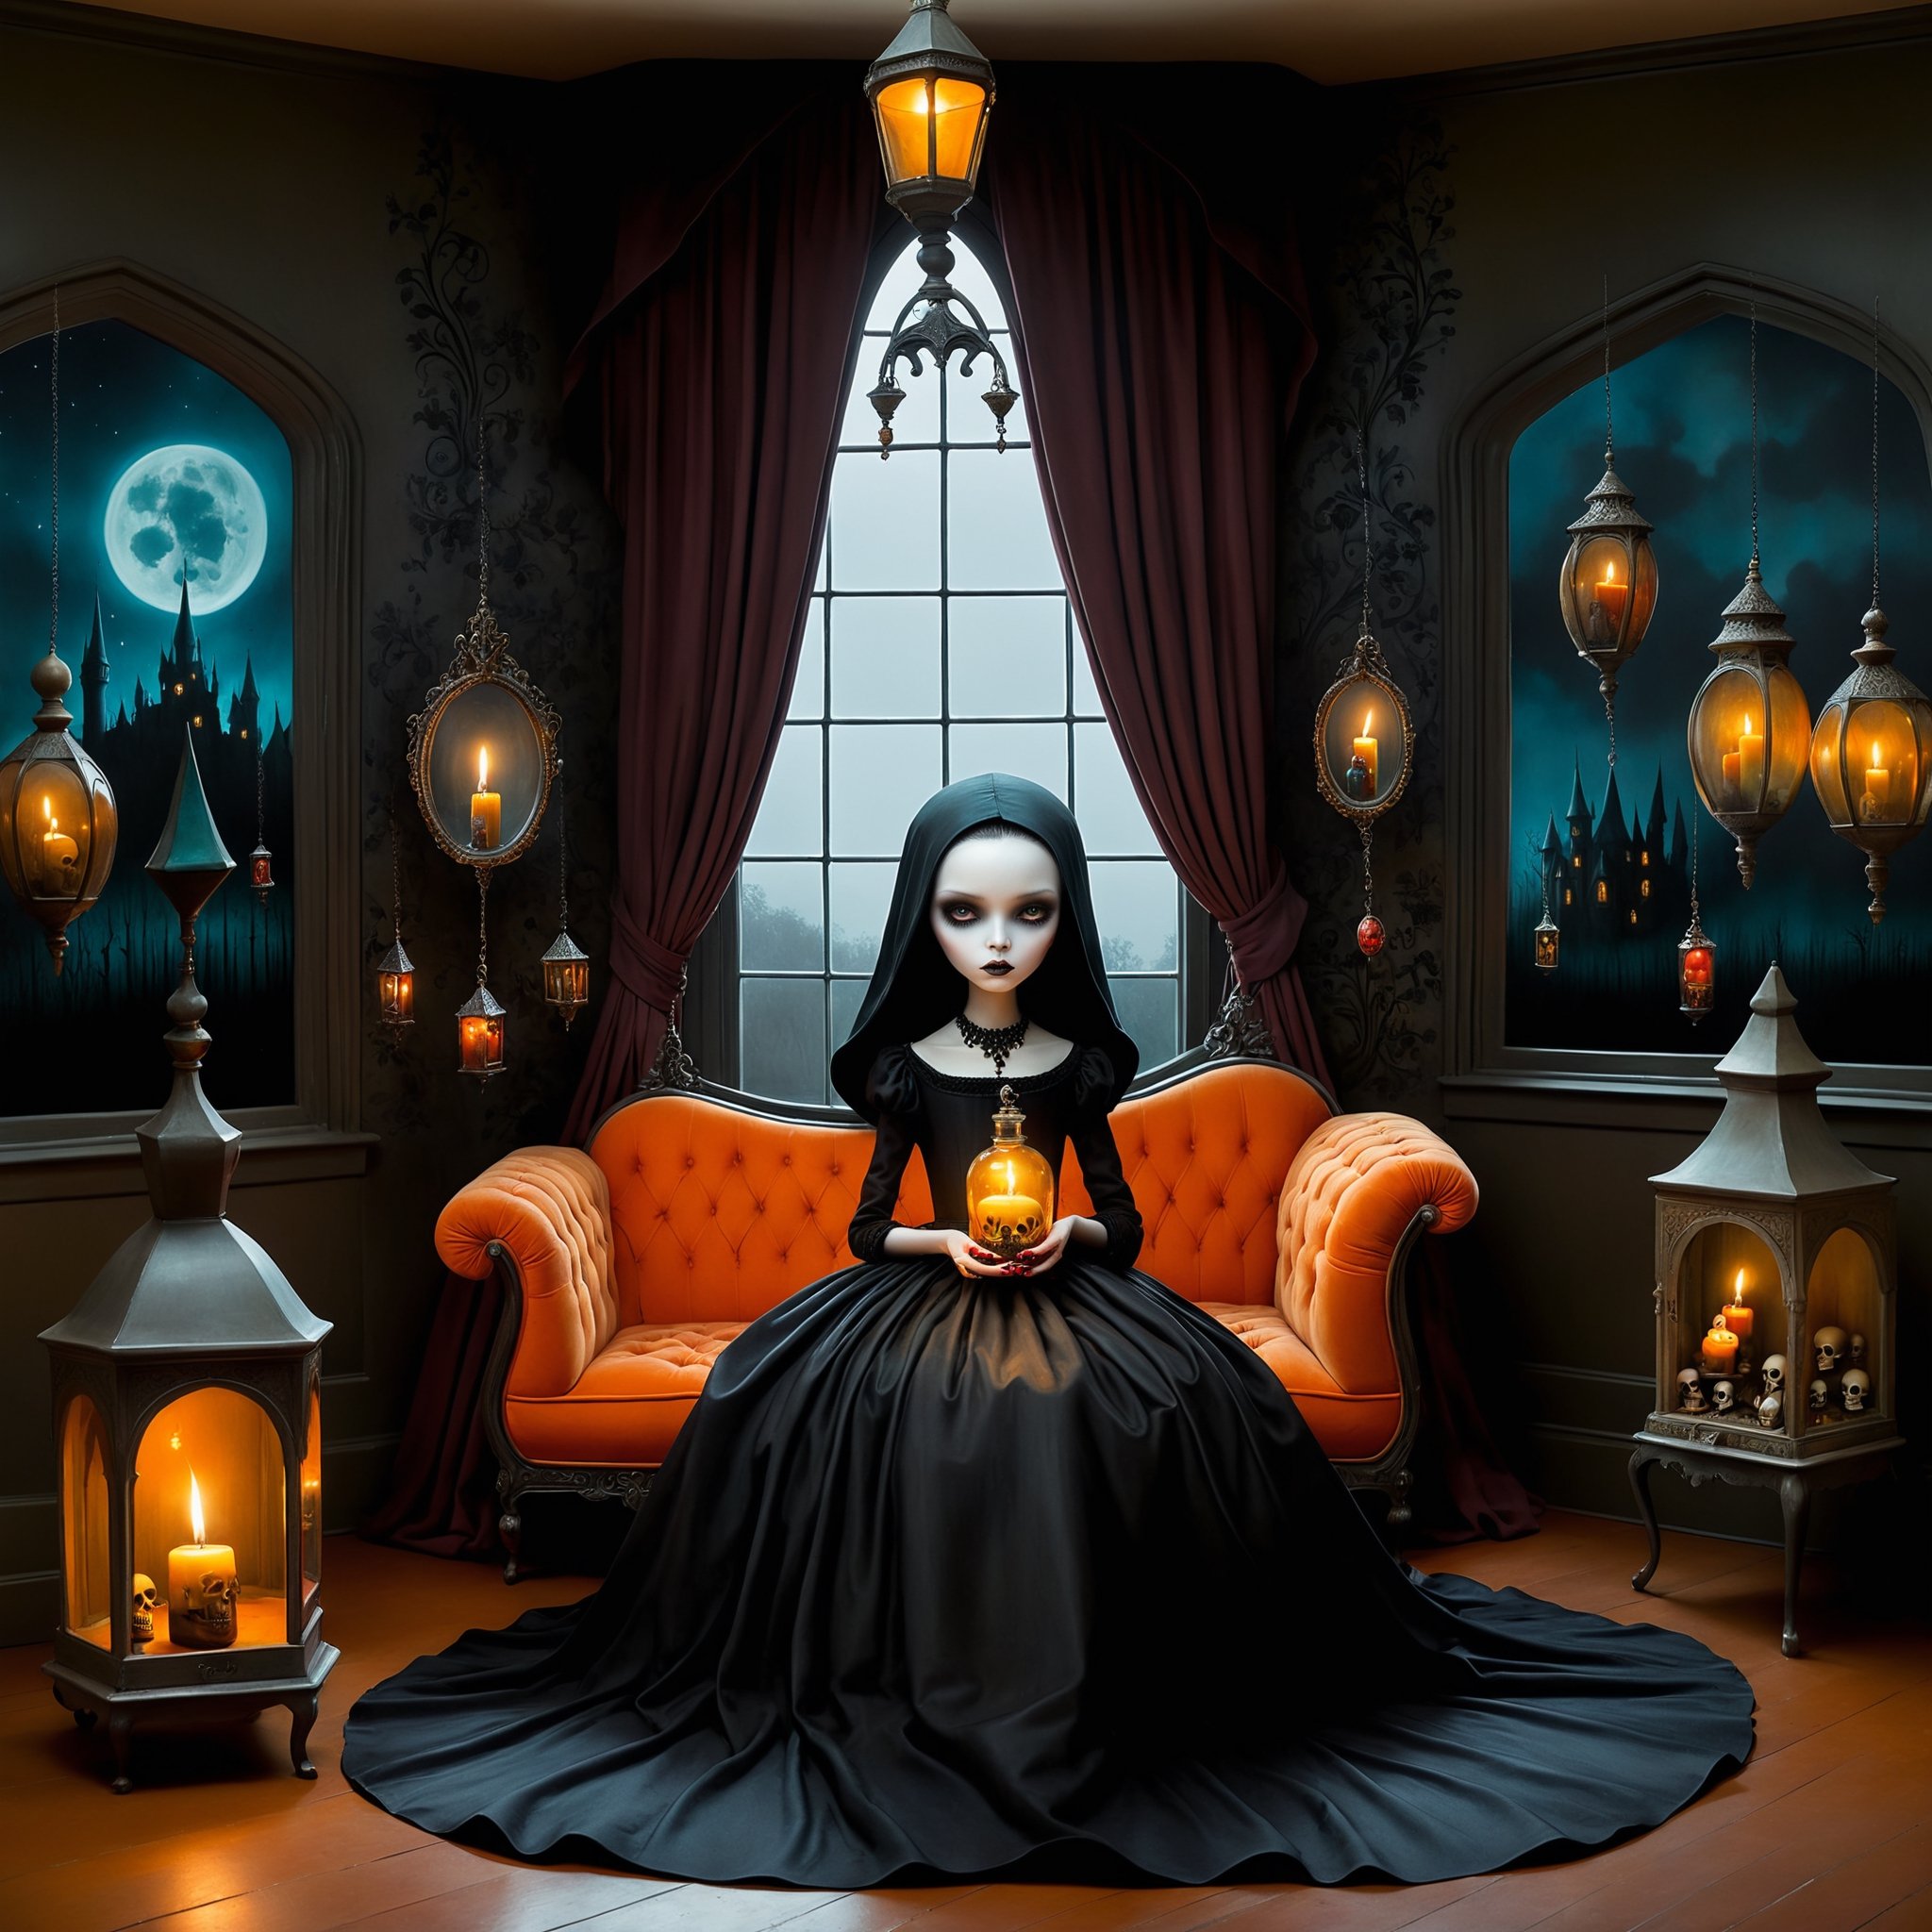 Cinematic shot, long shot, a gothic small girl in her gothic room casting spells, in the style Nicoletta Ceccoli, Mark Ryden and Esao Andrews. minimalist style. a detailed elaborate gothic bedroom with william morris gothic scary wallpaper, velvet curtains, cluttered with creepy cat, monster ghost paintings, dolls, colorful potion bottles, magic circle on floor, ancient leather spellbooks, candelabra, skulls, witch brooms, healing crystals. creepy cat. night time. dark outside. full moon visible through large window. (((perfect female hands))) (((perfect fingers))) (((manicured painted long fingernails))), in the style of esao andrews, Nicoletta Ceccoli, REALISTIC